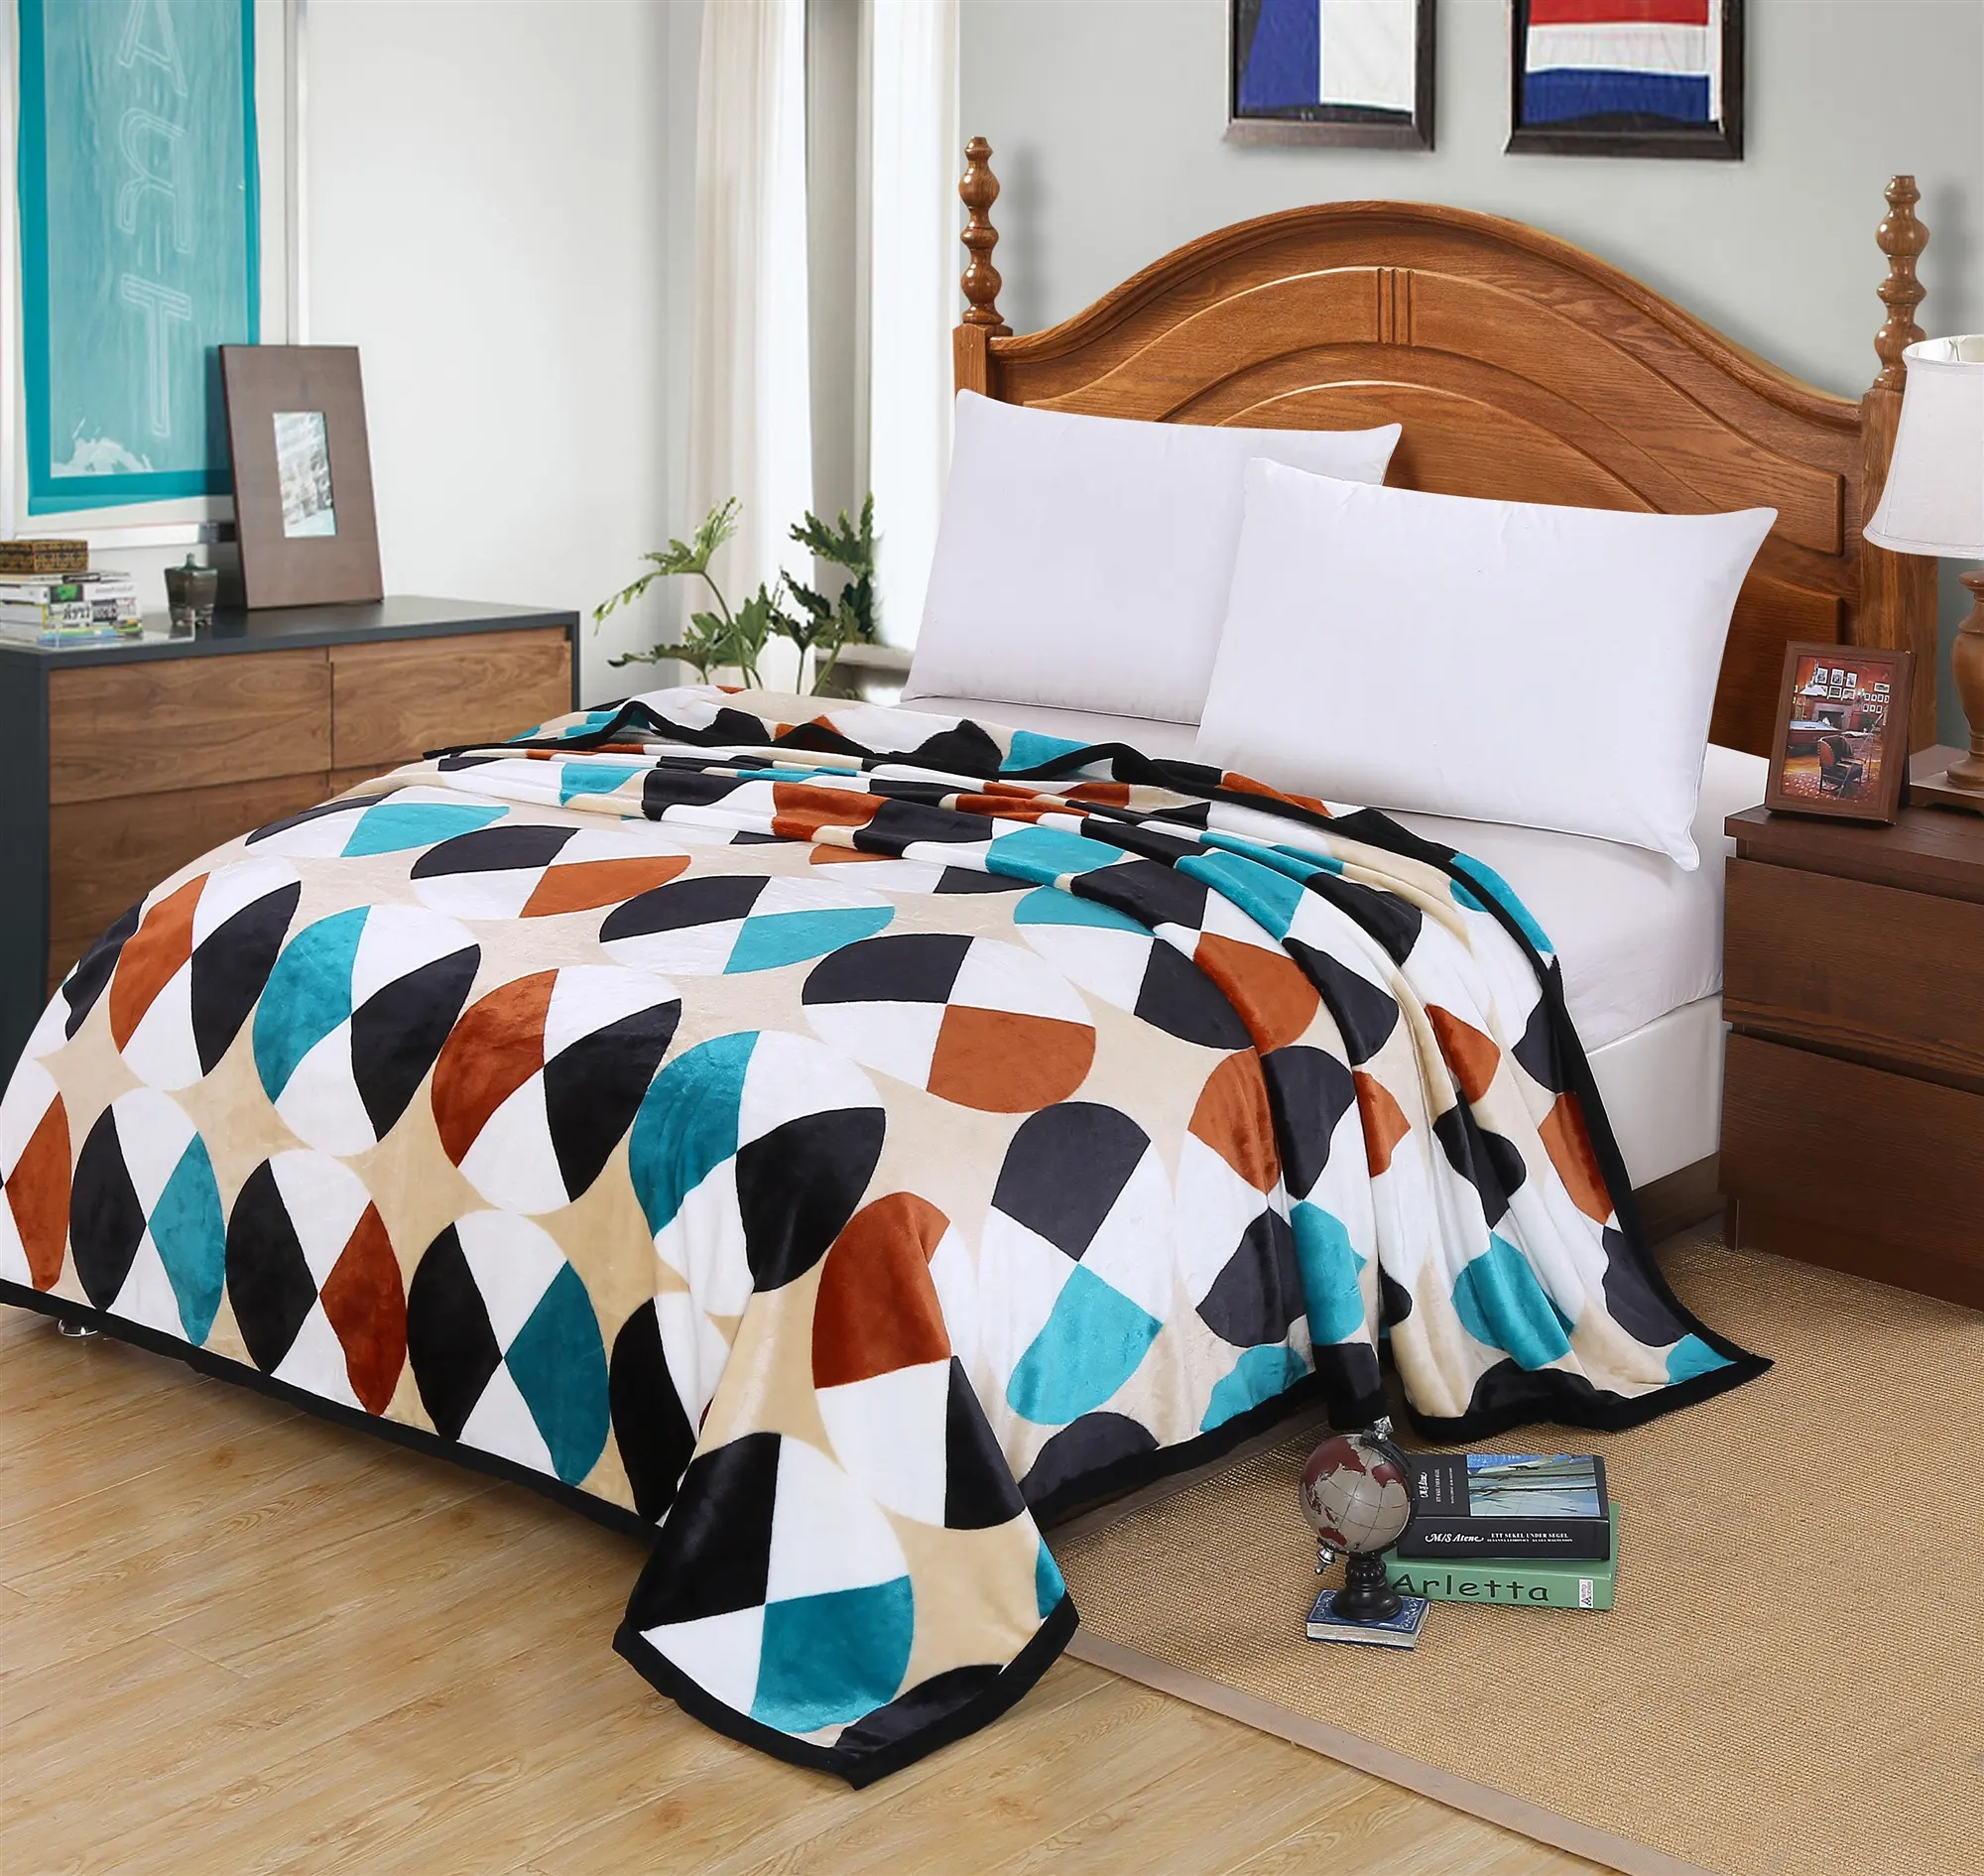 100% polyester printed flannel blanket with new design made in changshu factory